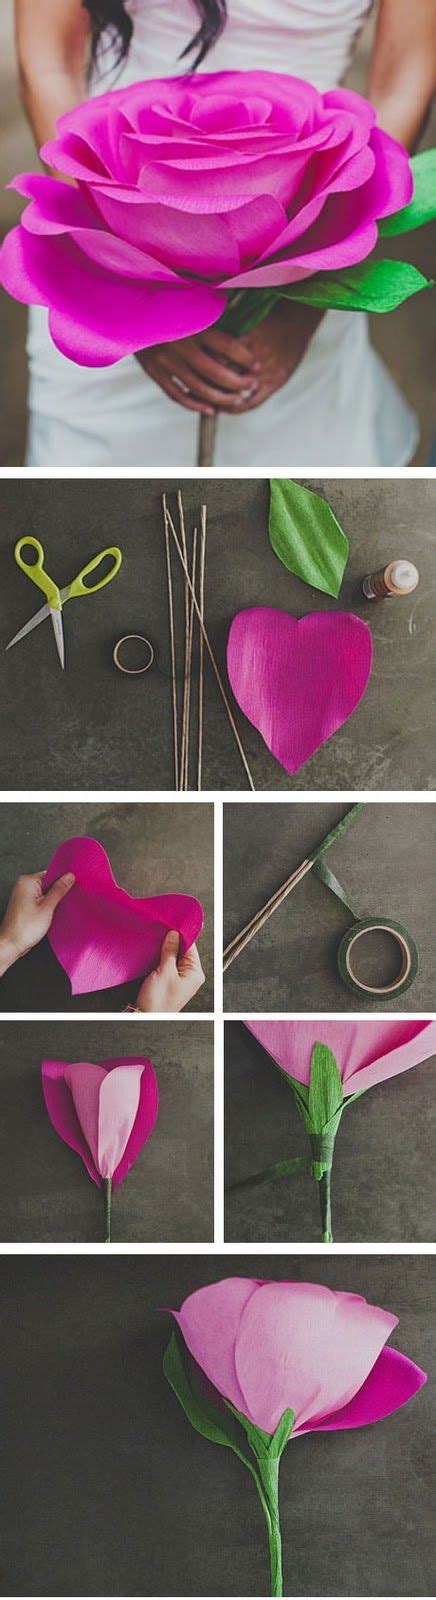 Diy Giant Paper Rose Flower Pictures Photos And Images For Facebook